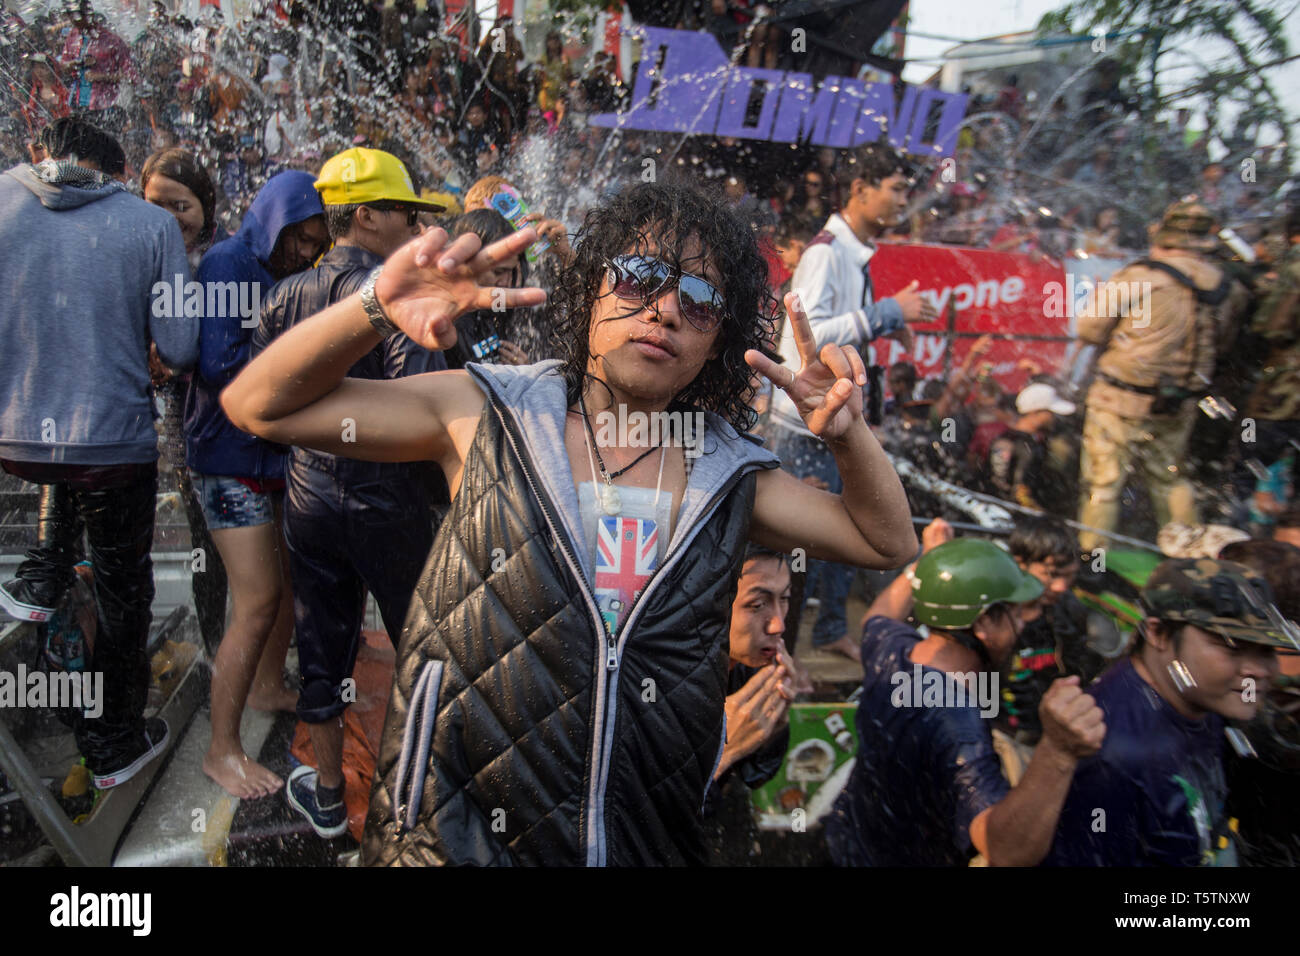 People getting wet and having fun during the Thingyan Burmese New Year Festival in Mandalay, Myanmar. Stock Photo